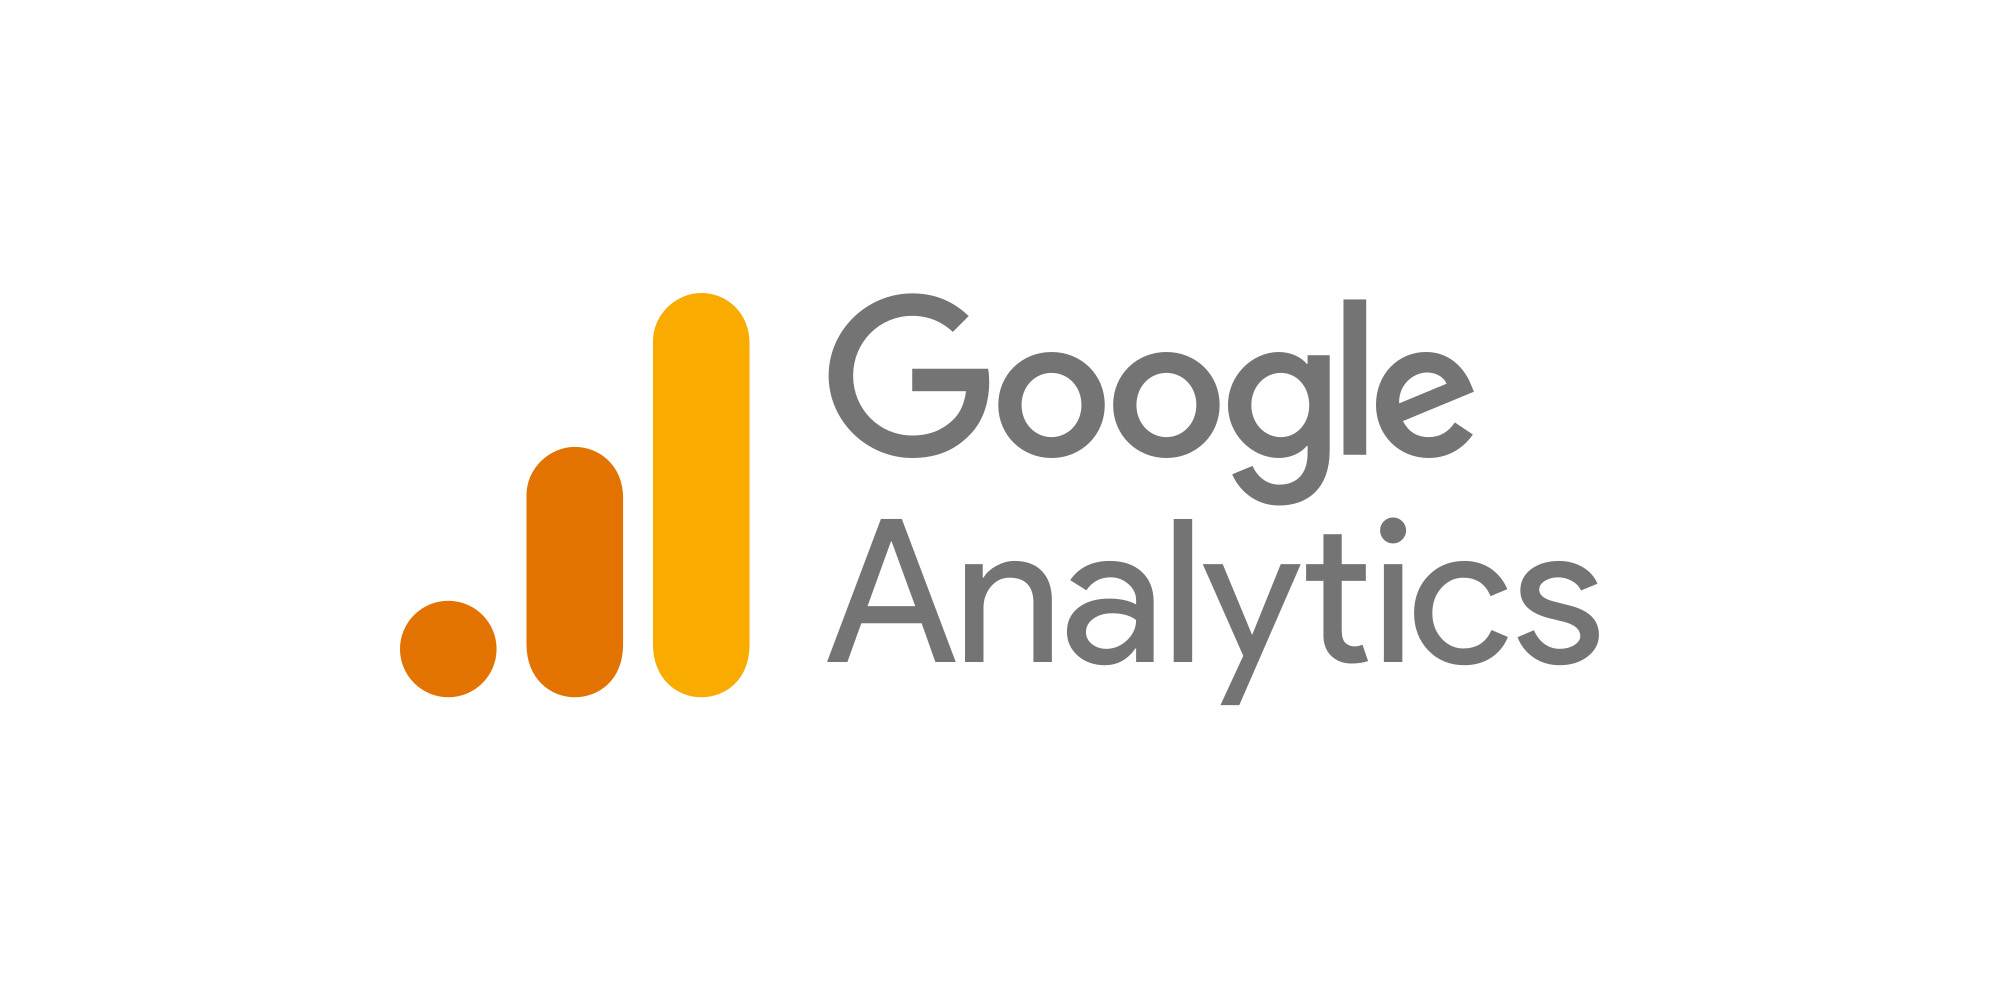 Google pulling the plug on Universal Analytics in 2023 - 9to5Google